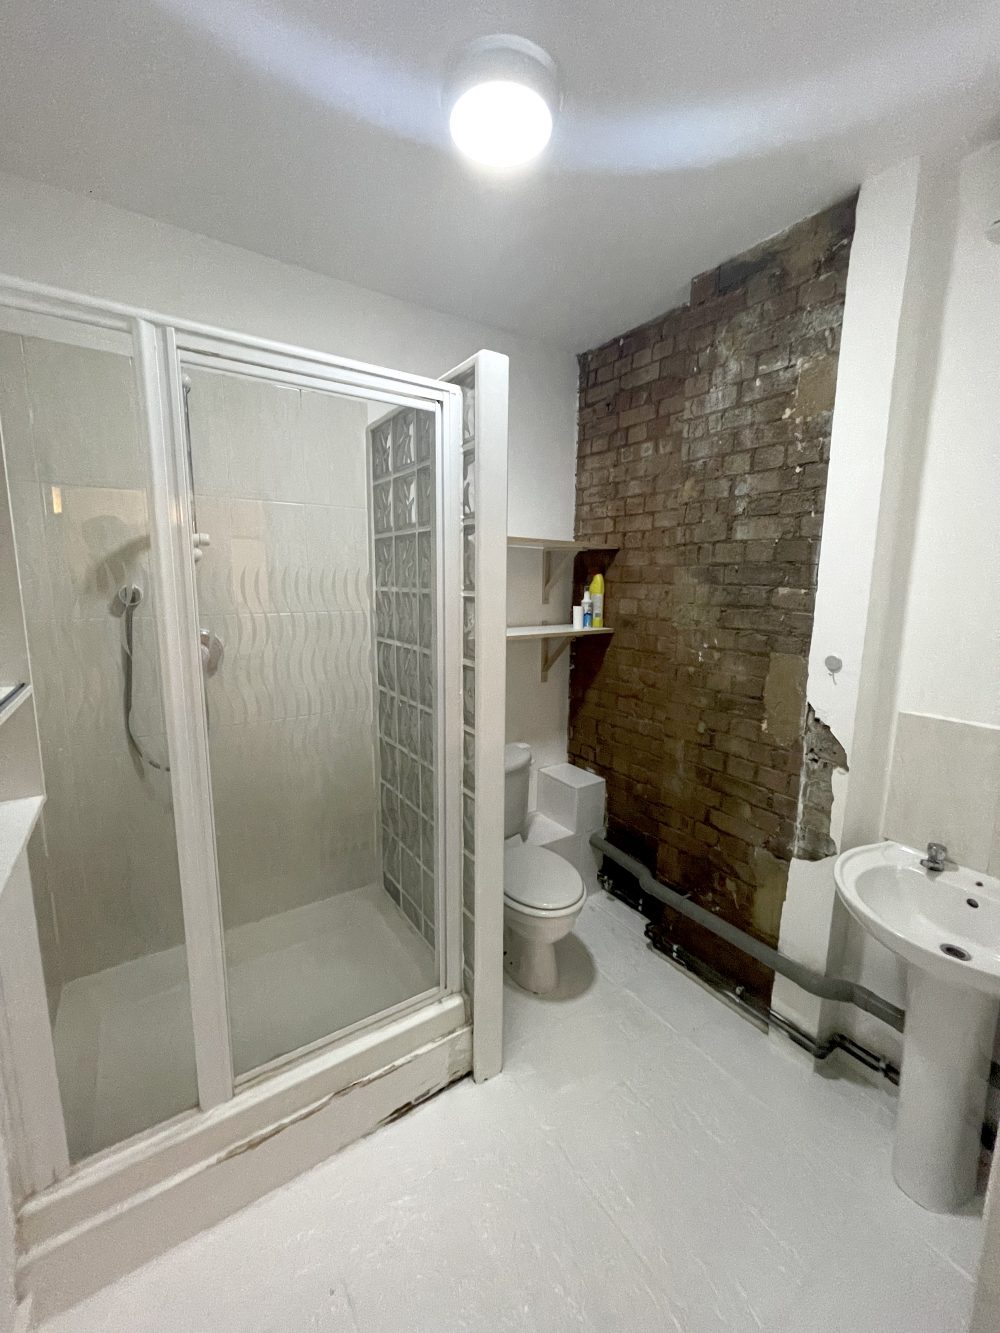 2 Bedroom Flat Available to rent in E9 London Fields Enterprise House Pic28